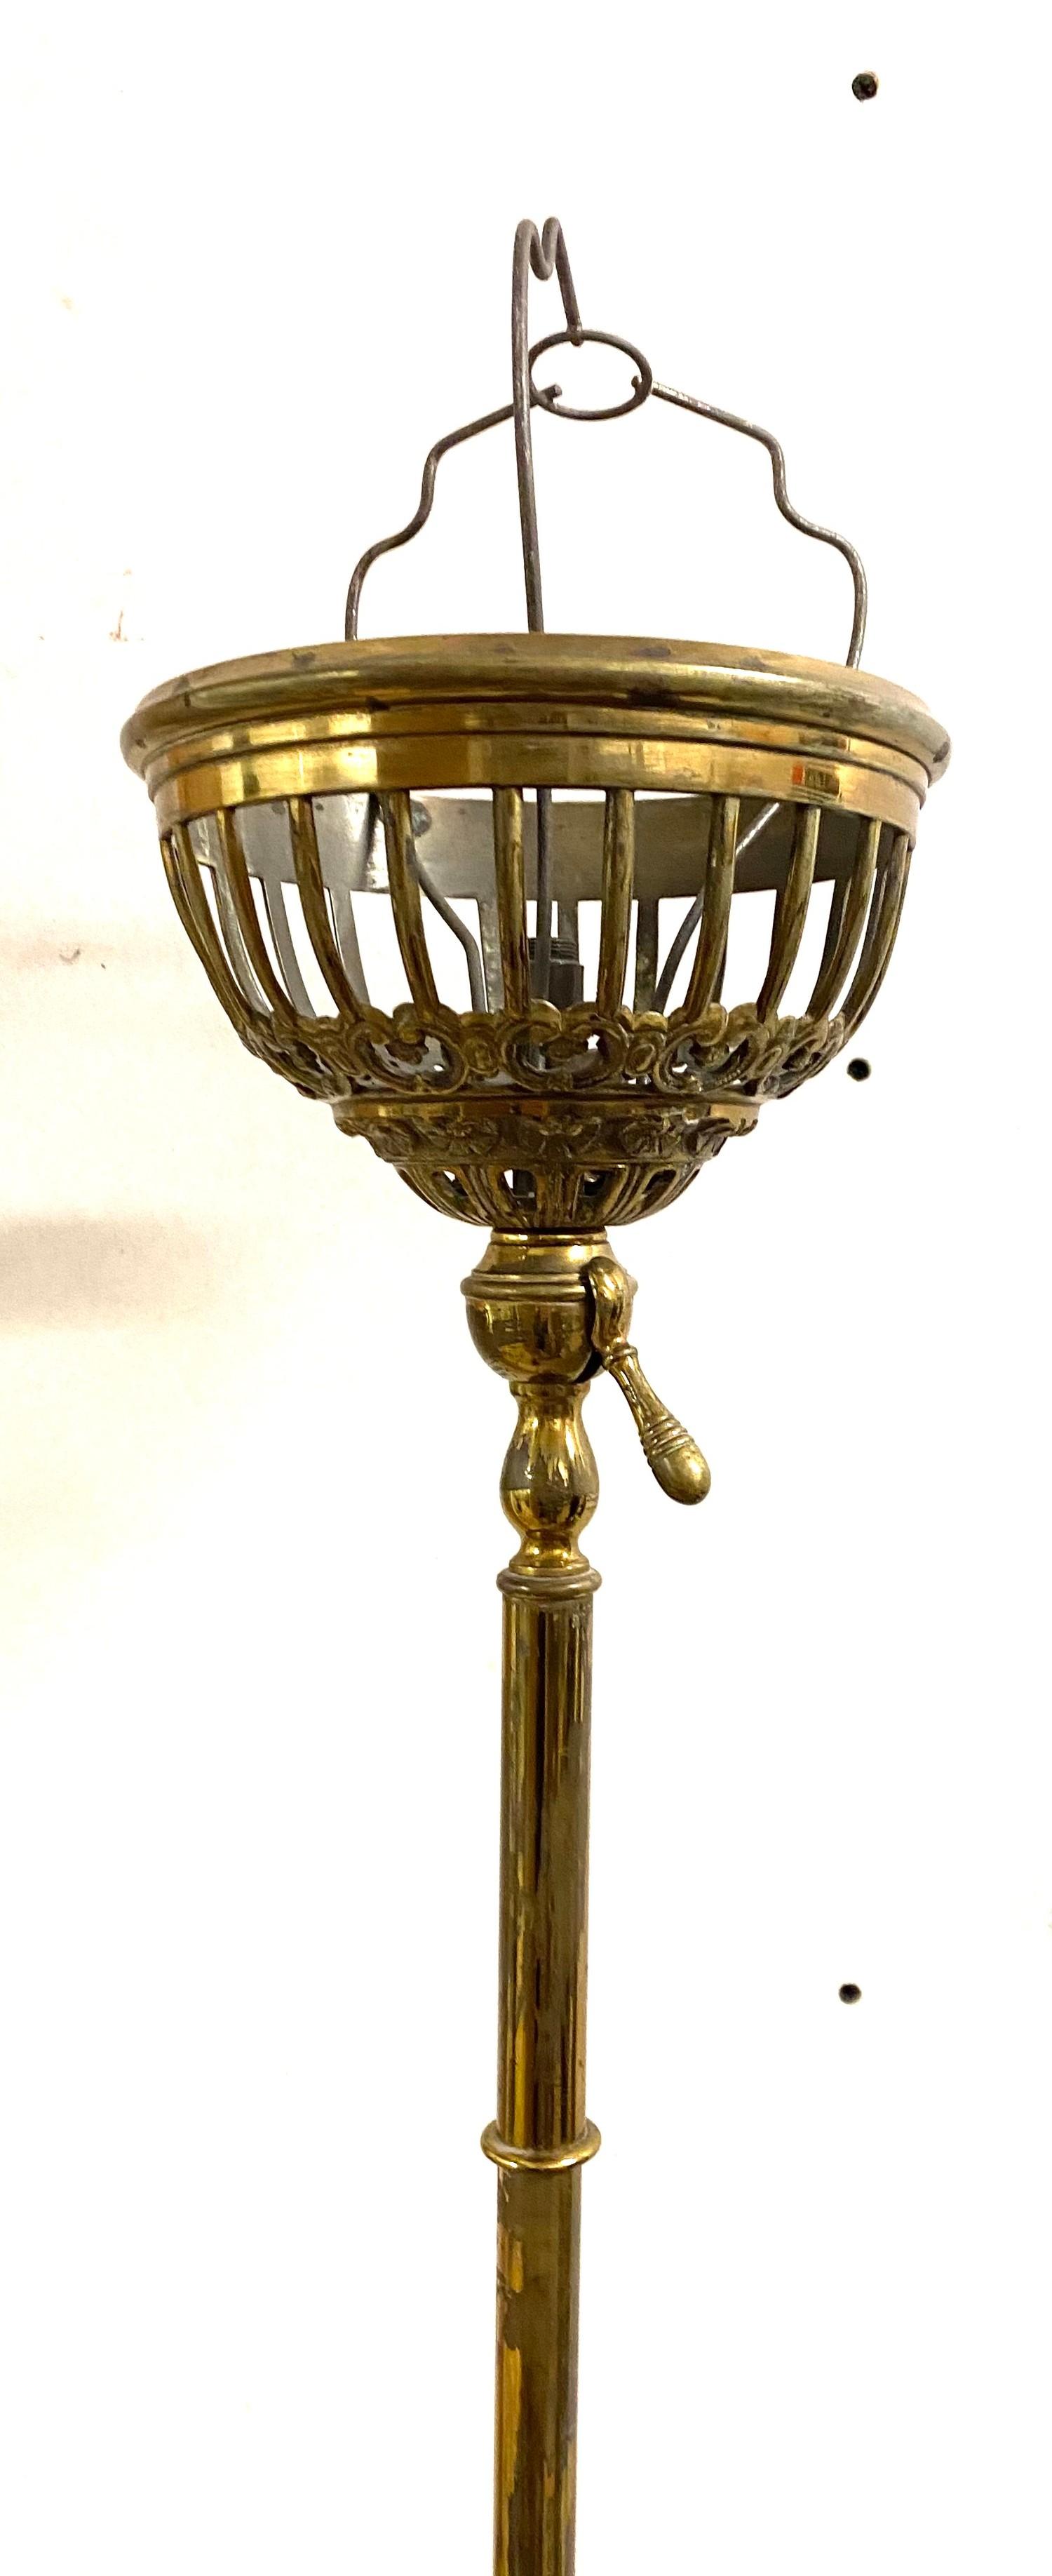 Victorian ornate telescopic oil lamp converted to electric, untested, some damage please view images - Image 3 of 9